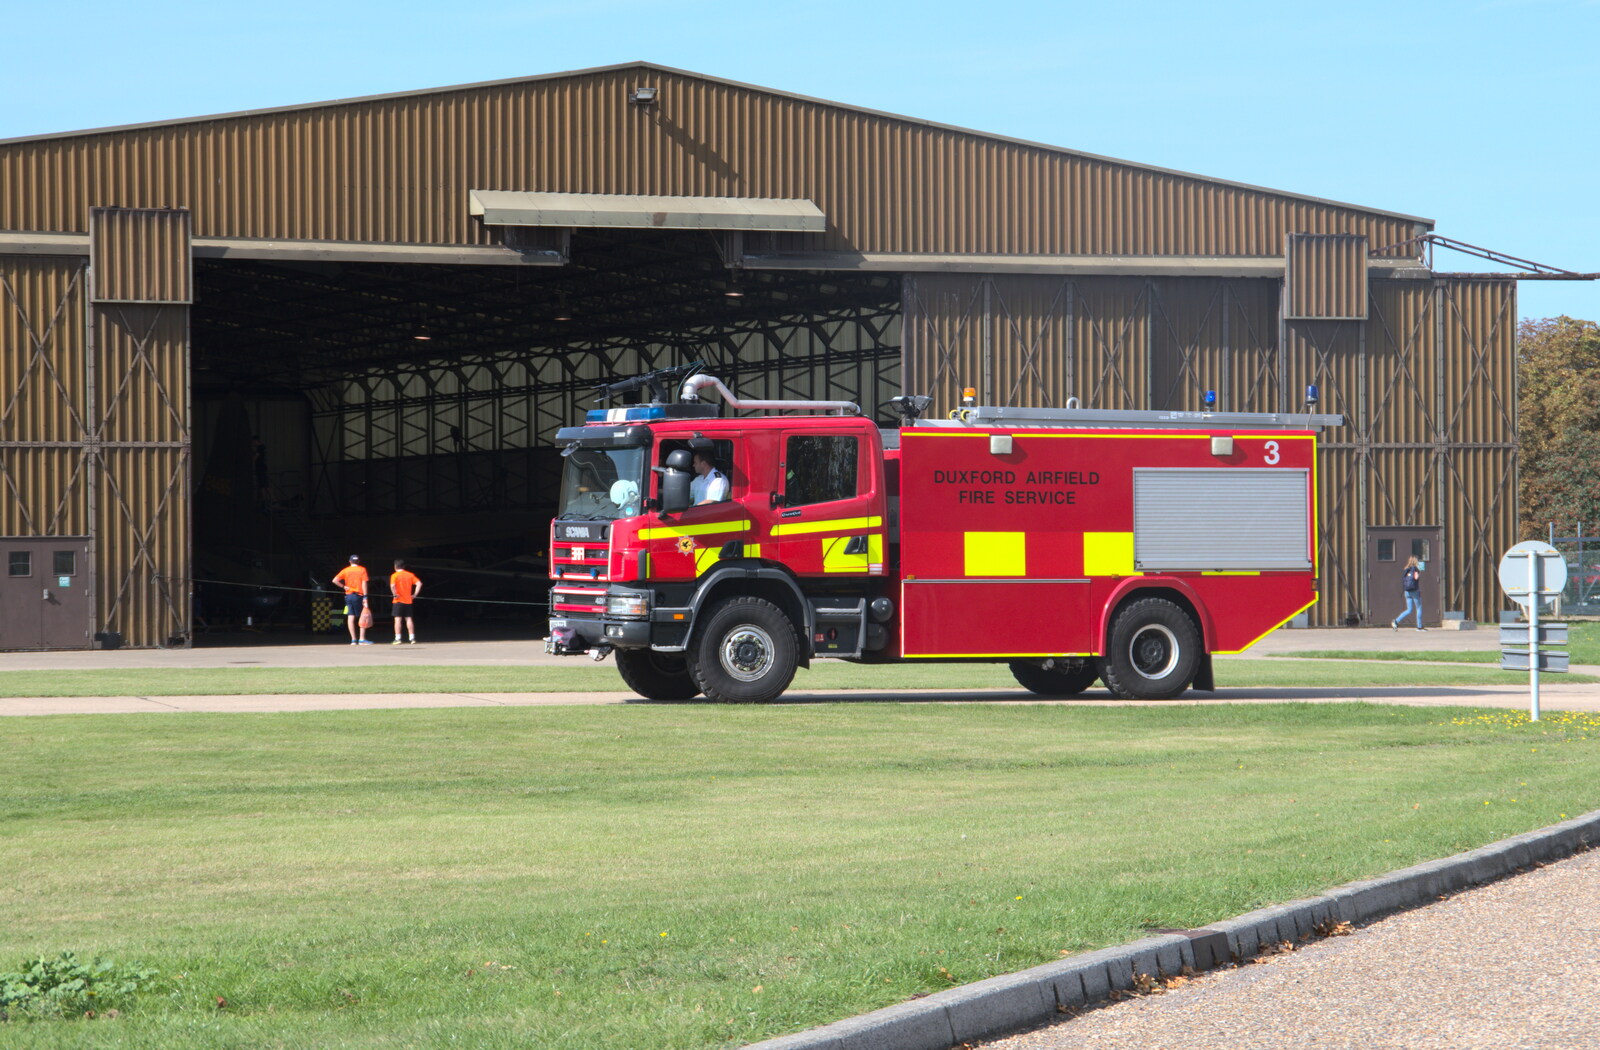 The Duxford Airfield Fire Service engine is out from The Duxford Dash, IWM Duxford, Cambridge - 13th September 2020